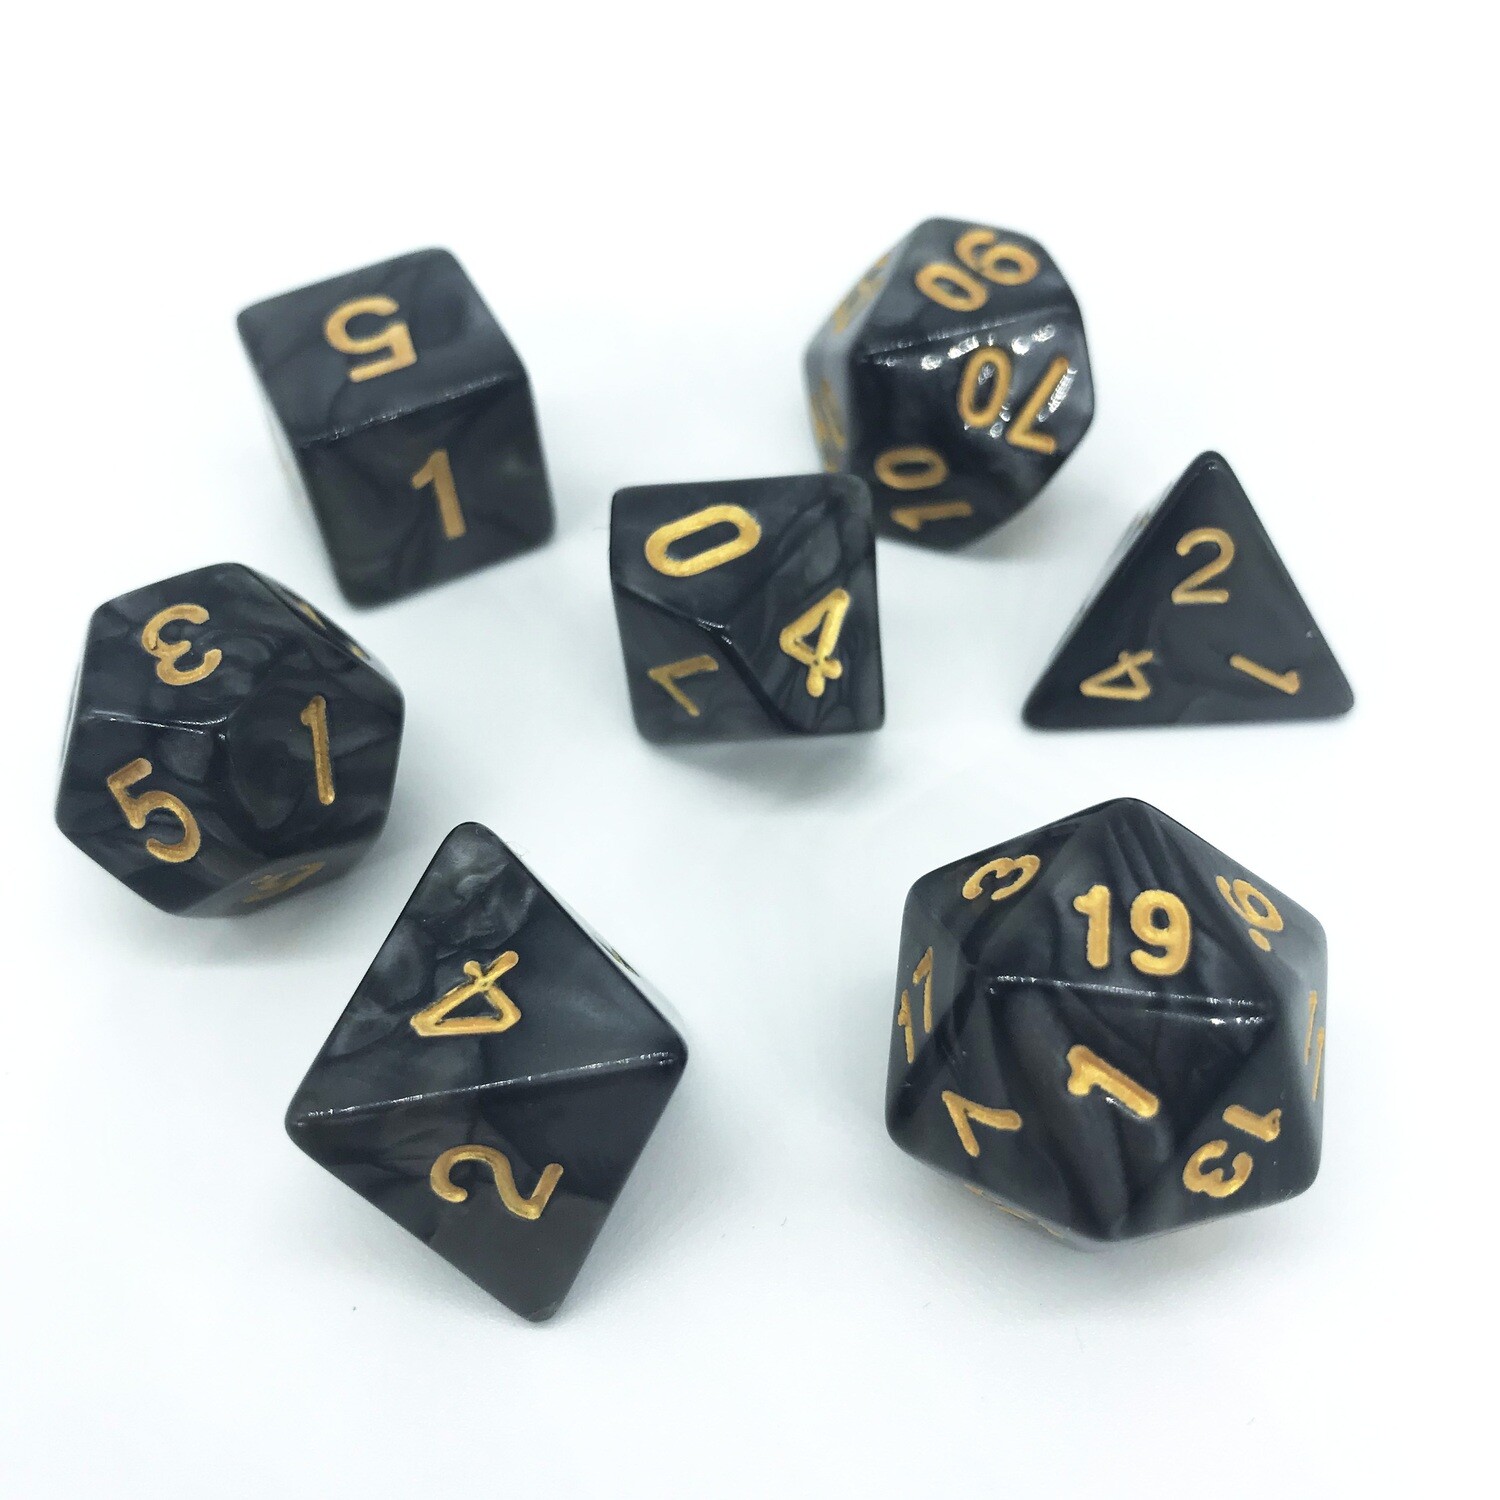 Dice Set - Black marbled with gold numbers